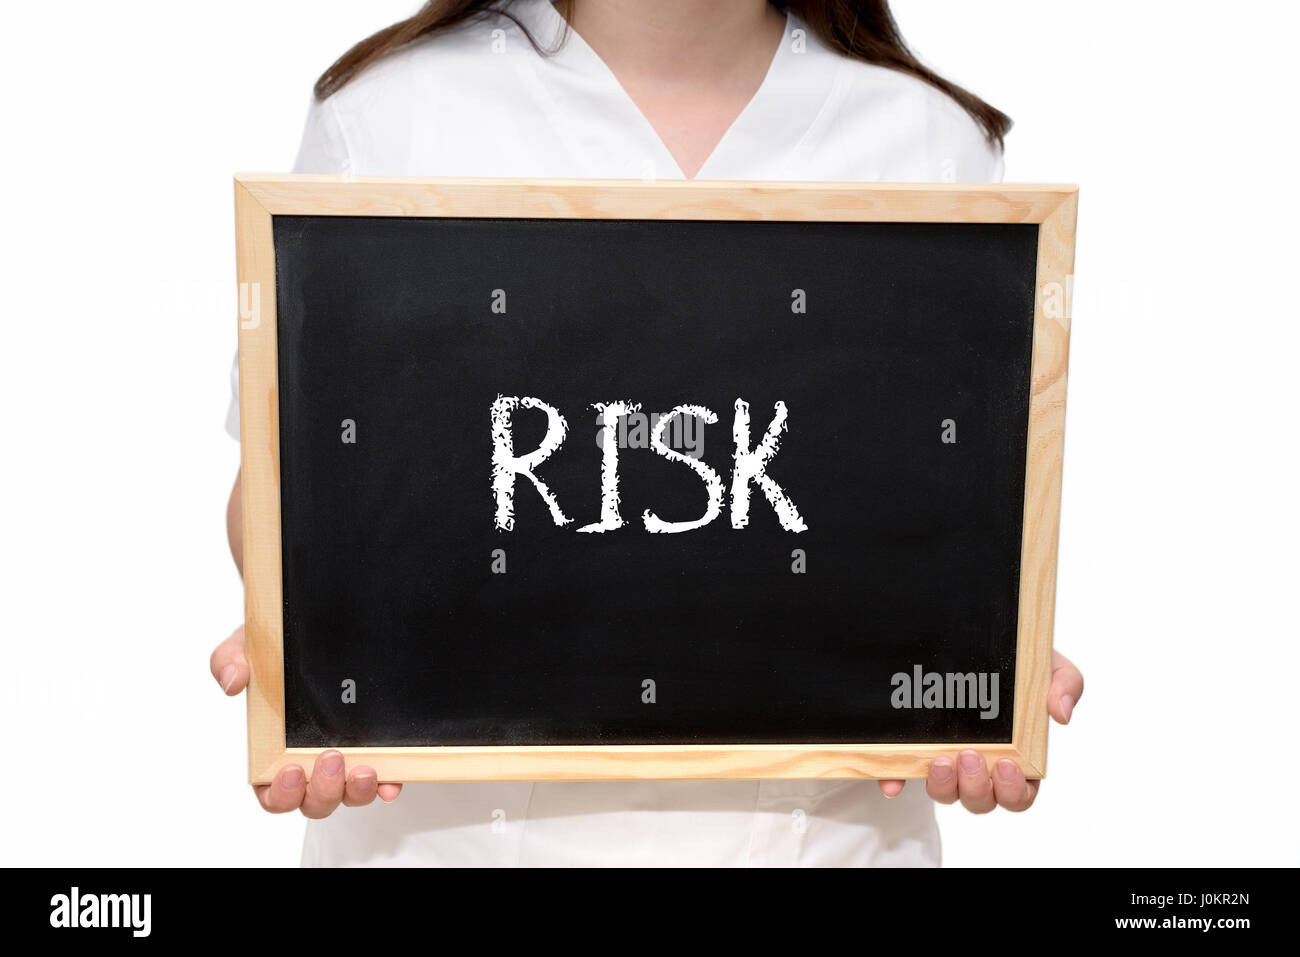 Female nurse holding a slate board with the text Risk written with chalk, isolated on white background. Stock Photo